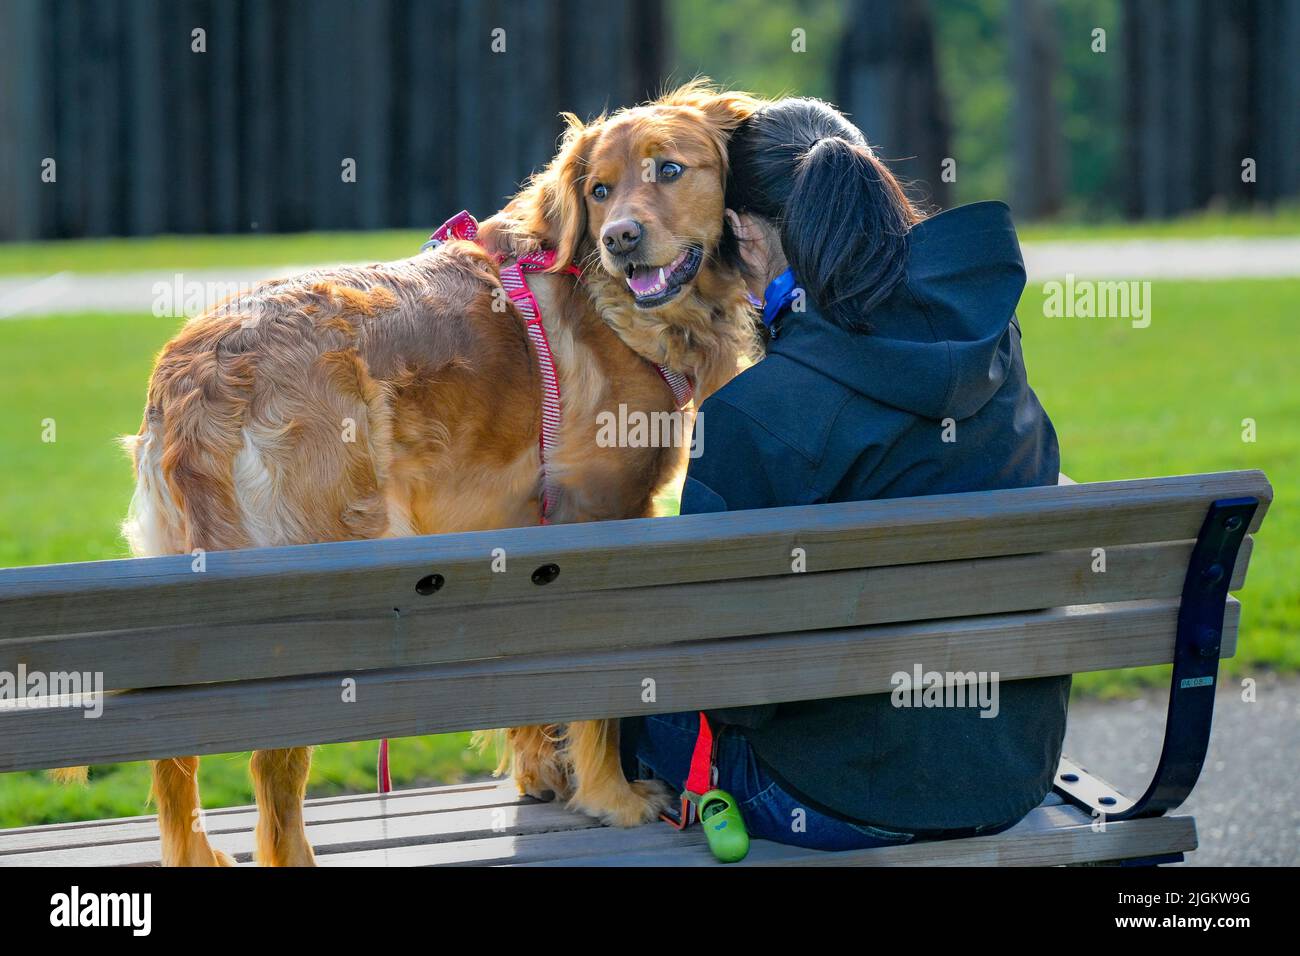 Young woman and dog on park bench Stock Photo